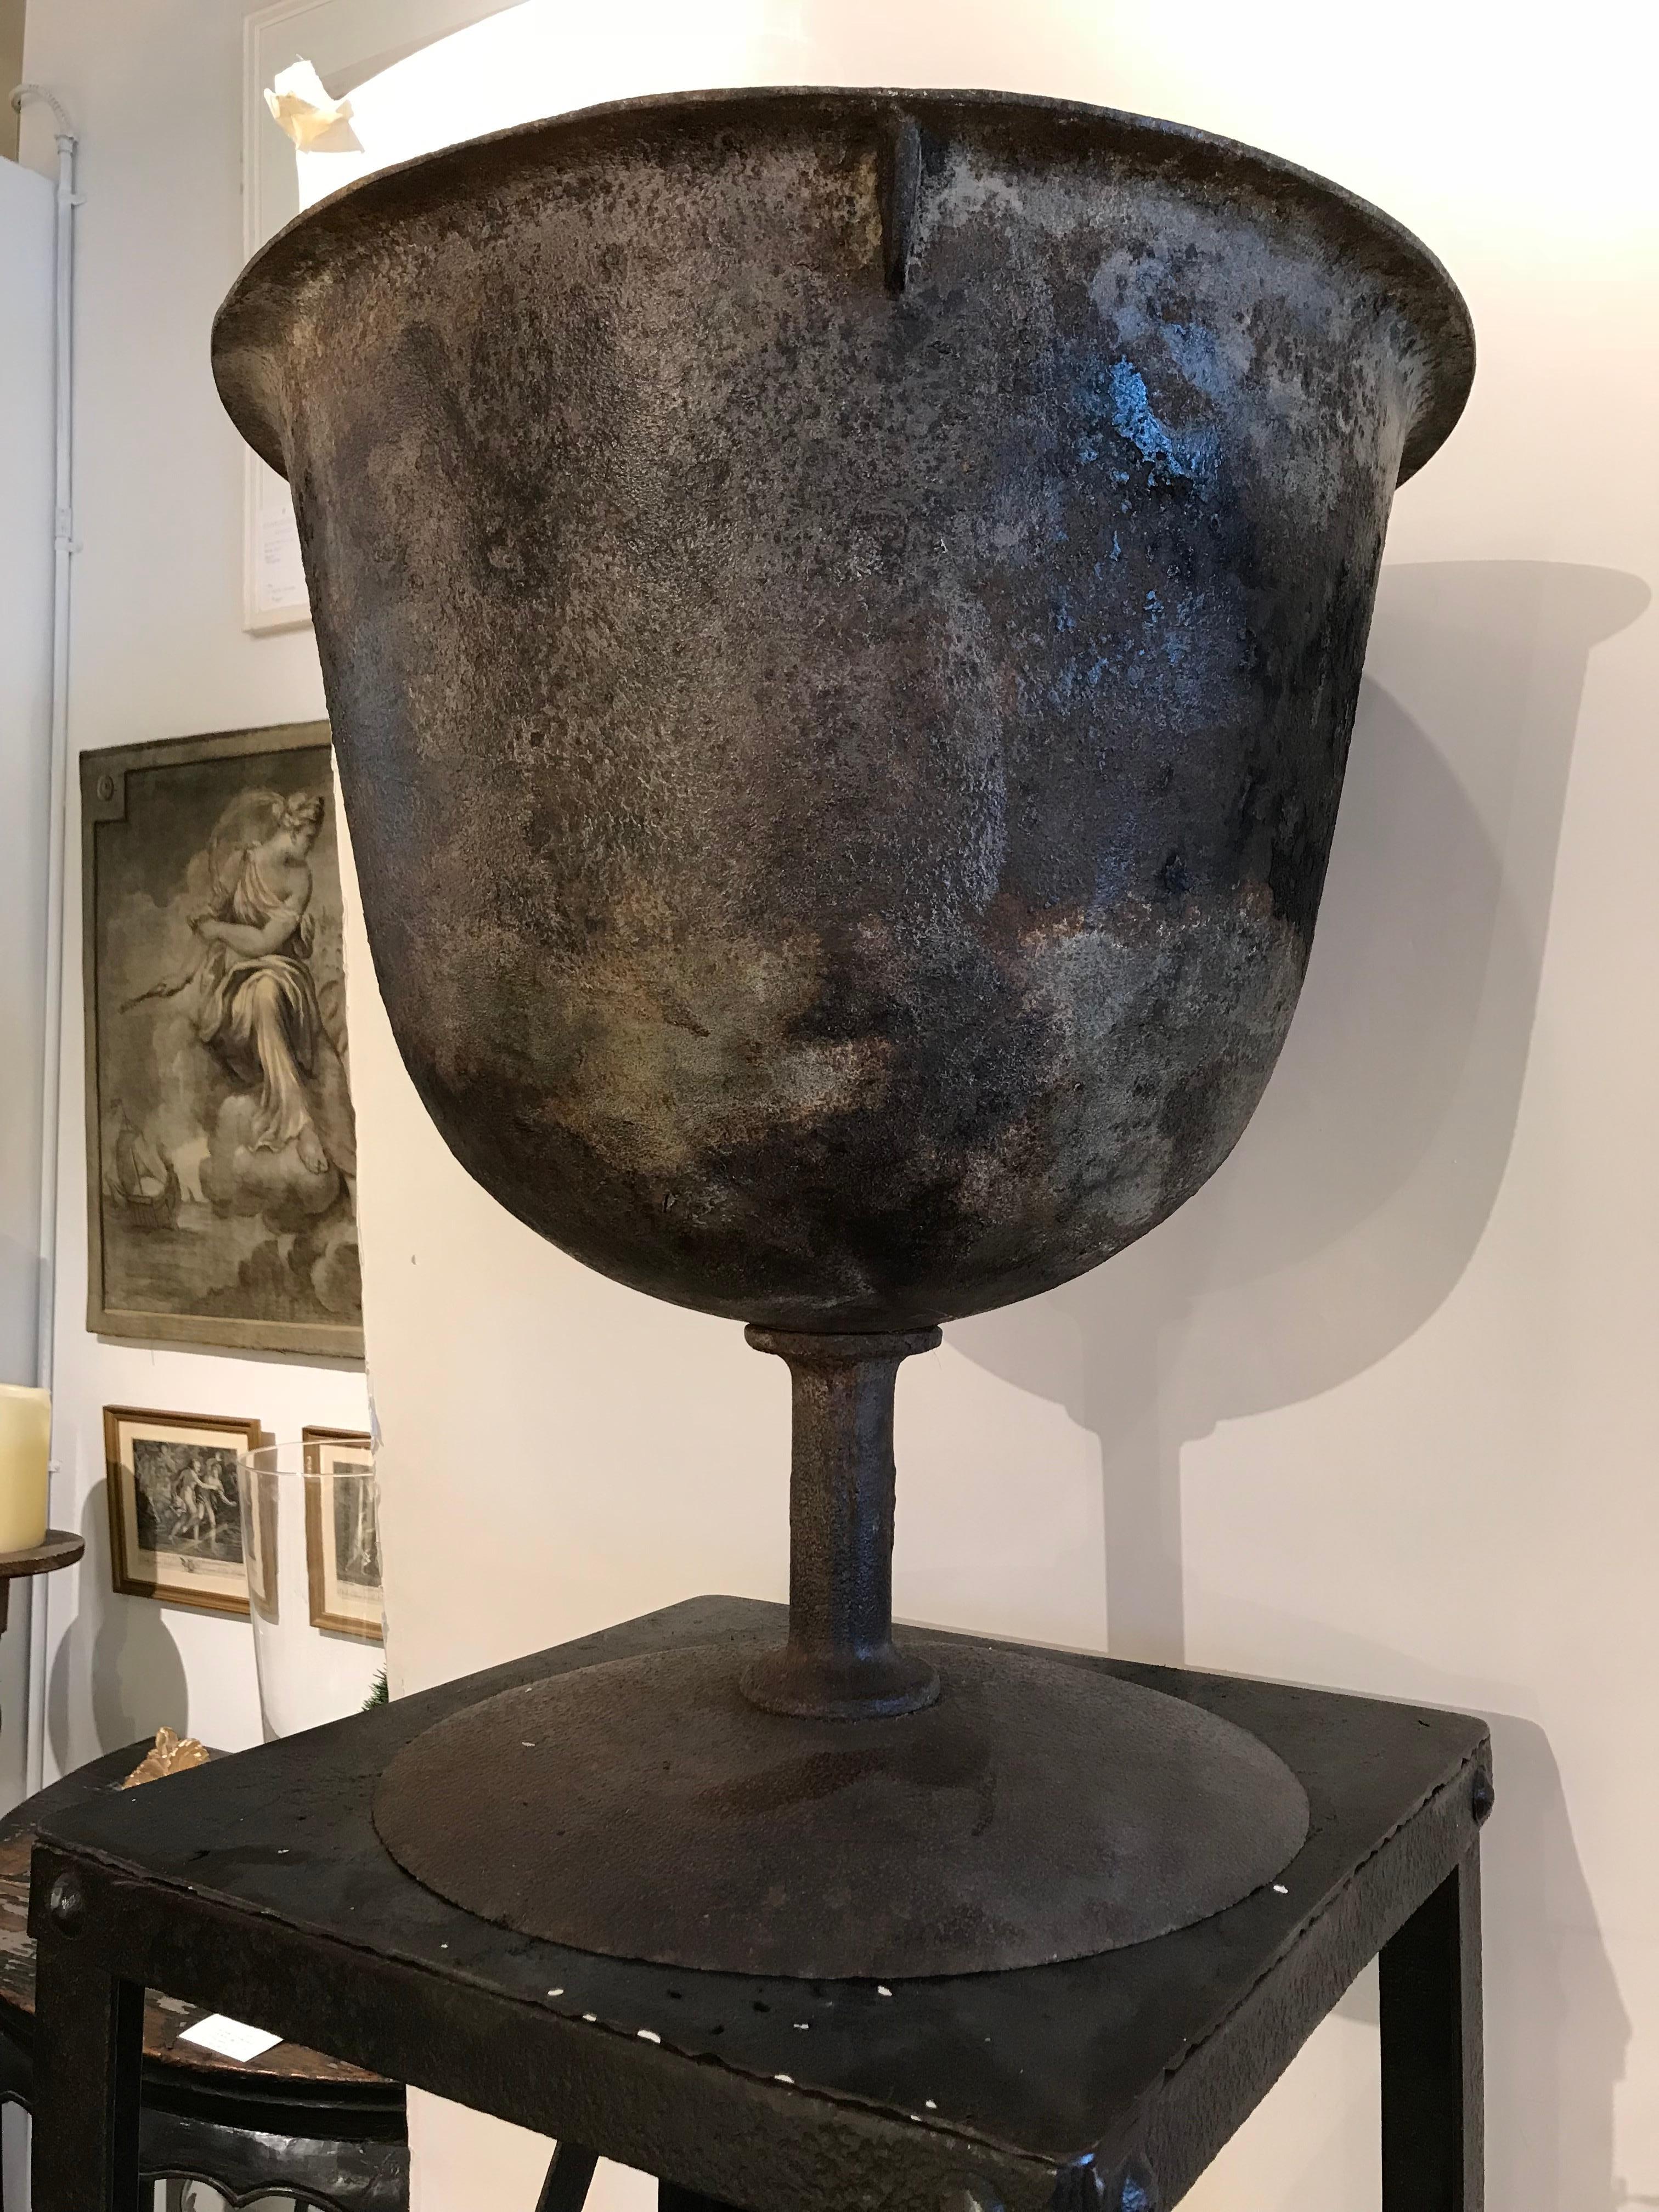 Iron urn and stand, circa 1900--sold and priced as set only.

Measures: stand 54” H x 24.5” D x 24.5” W (at base)
urn 23.5” diameter x 21.75” height.